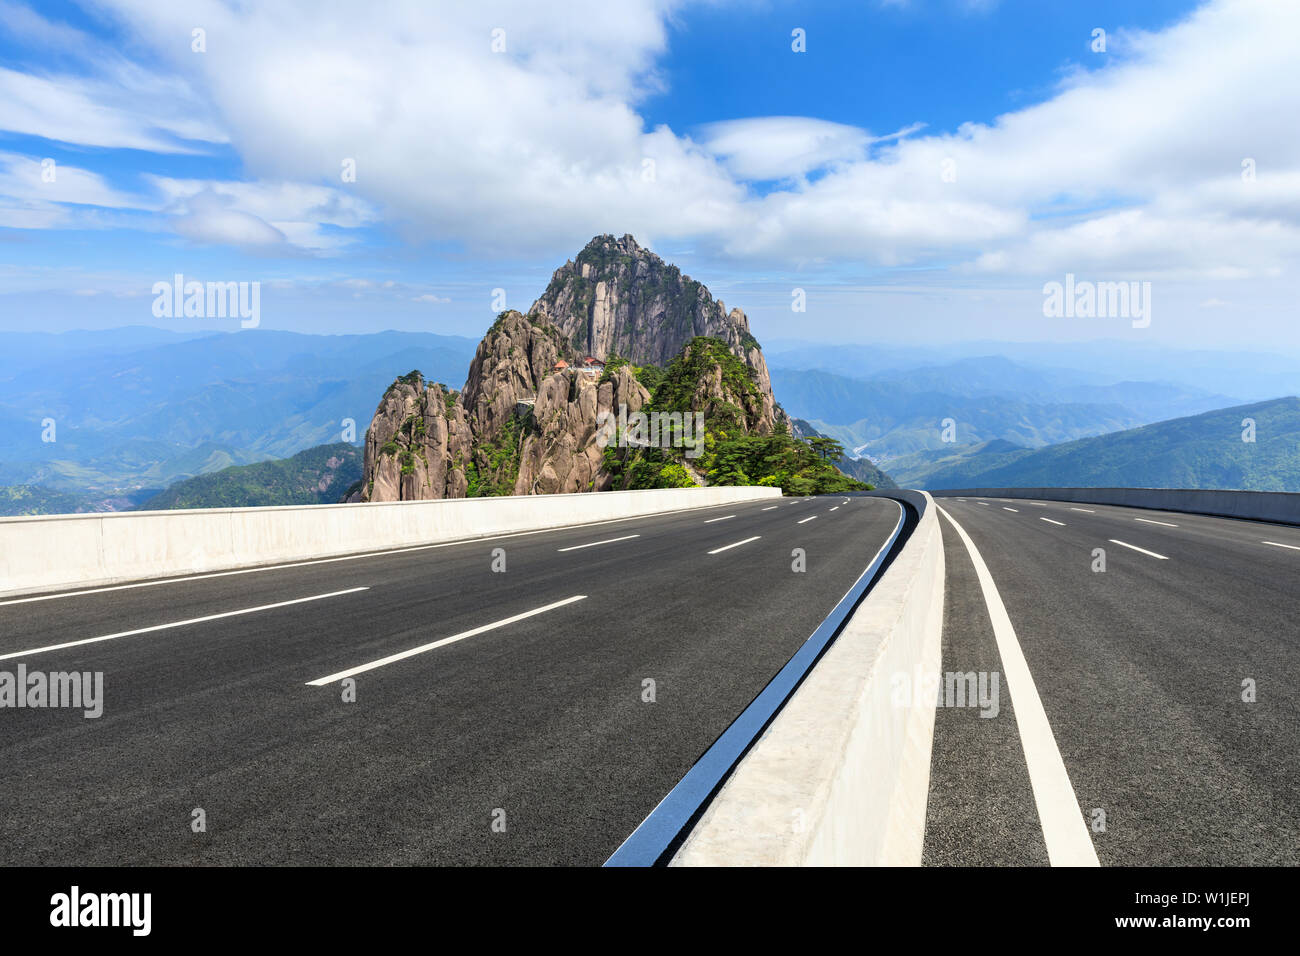 Asphalt highway and beautiful mountain nature landscape in Huangshan,Anhui,China. Stock Photo